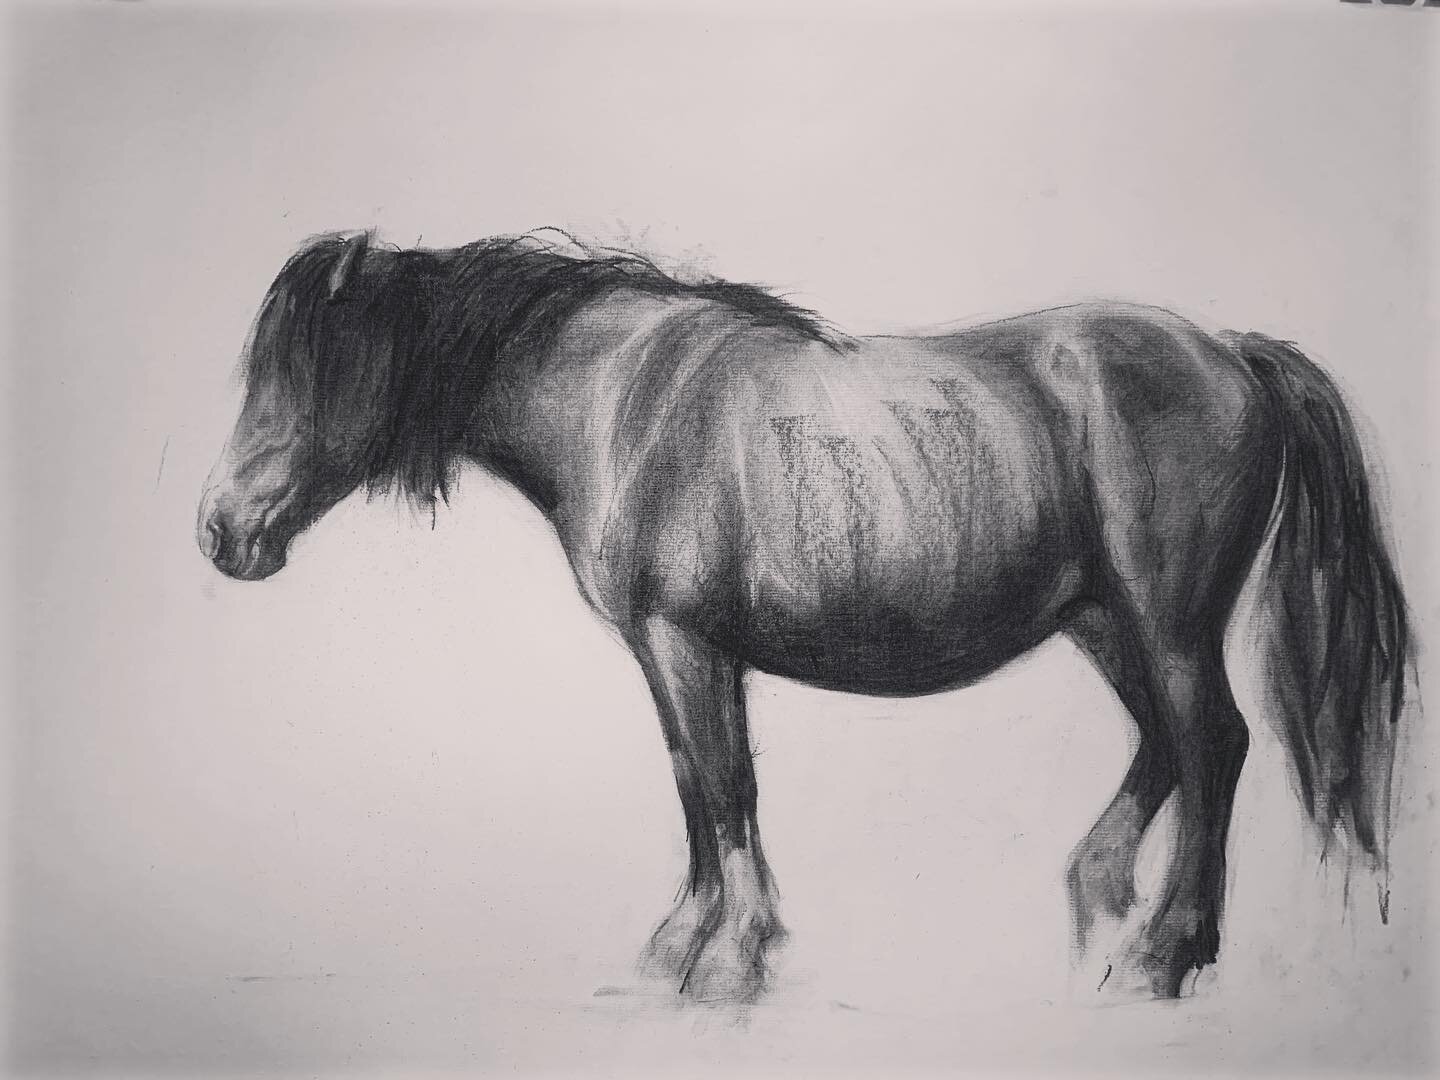 Dozing mountain pony, charcoal on paper #blackmountains #wales #wild #haybluff #charcoaldrawing #contemporarydrawing #equine #pony